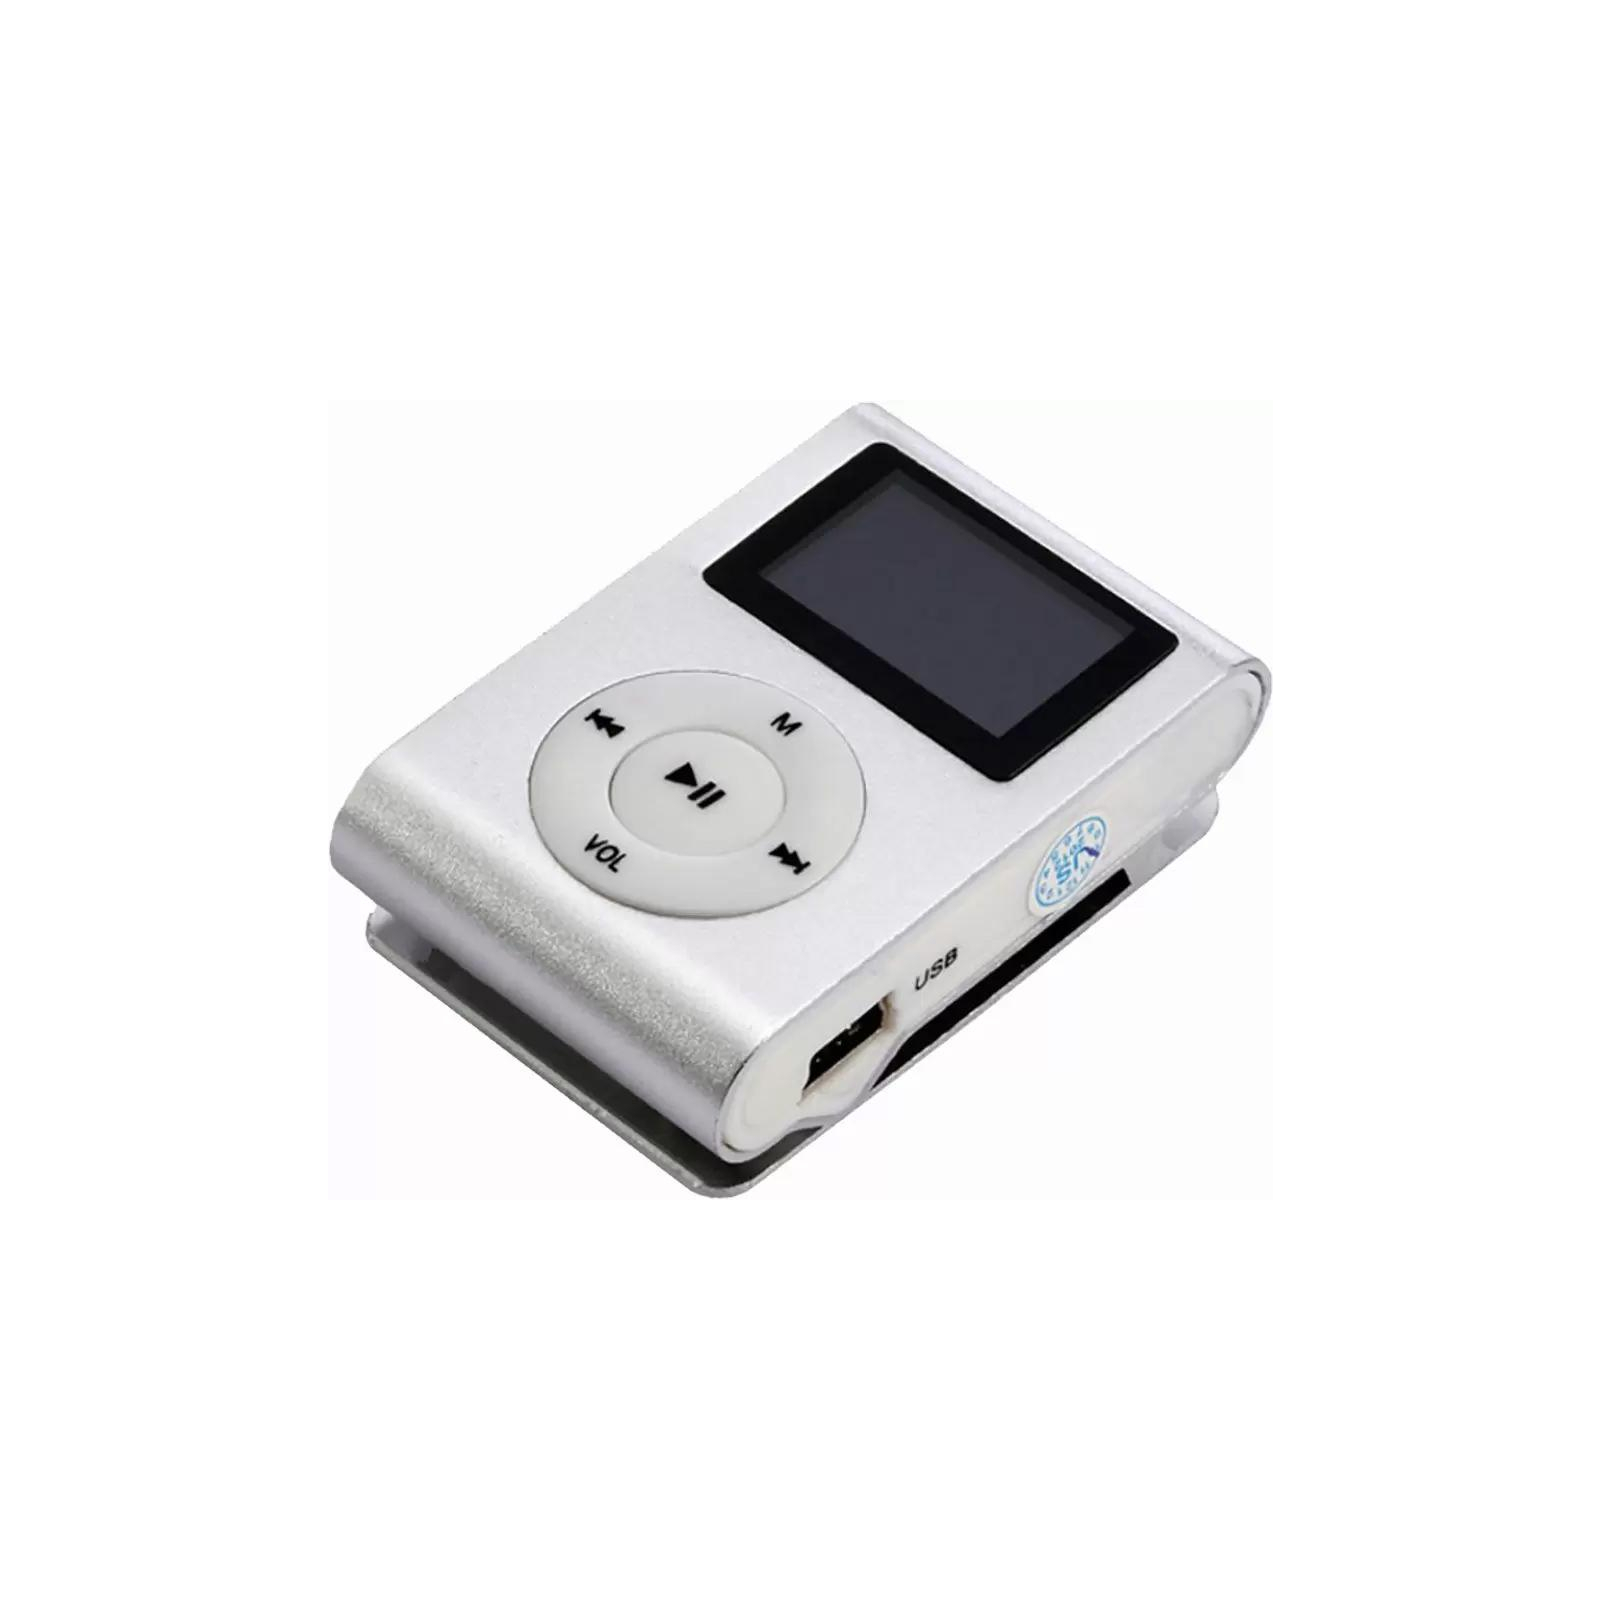 MP3 плеєр Toto With display&Earphone Mp3 Blue (TPS-02-Blue)